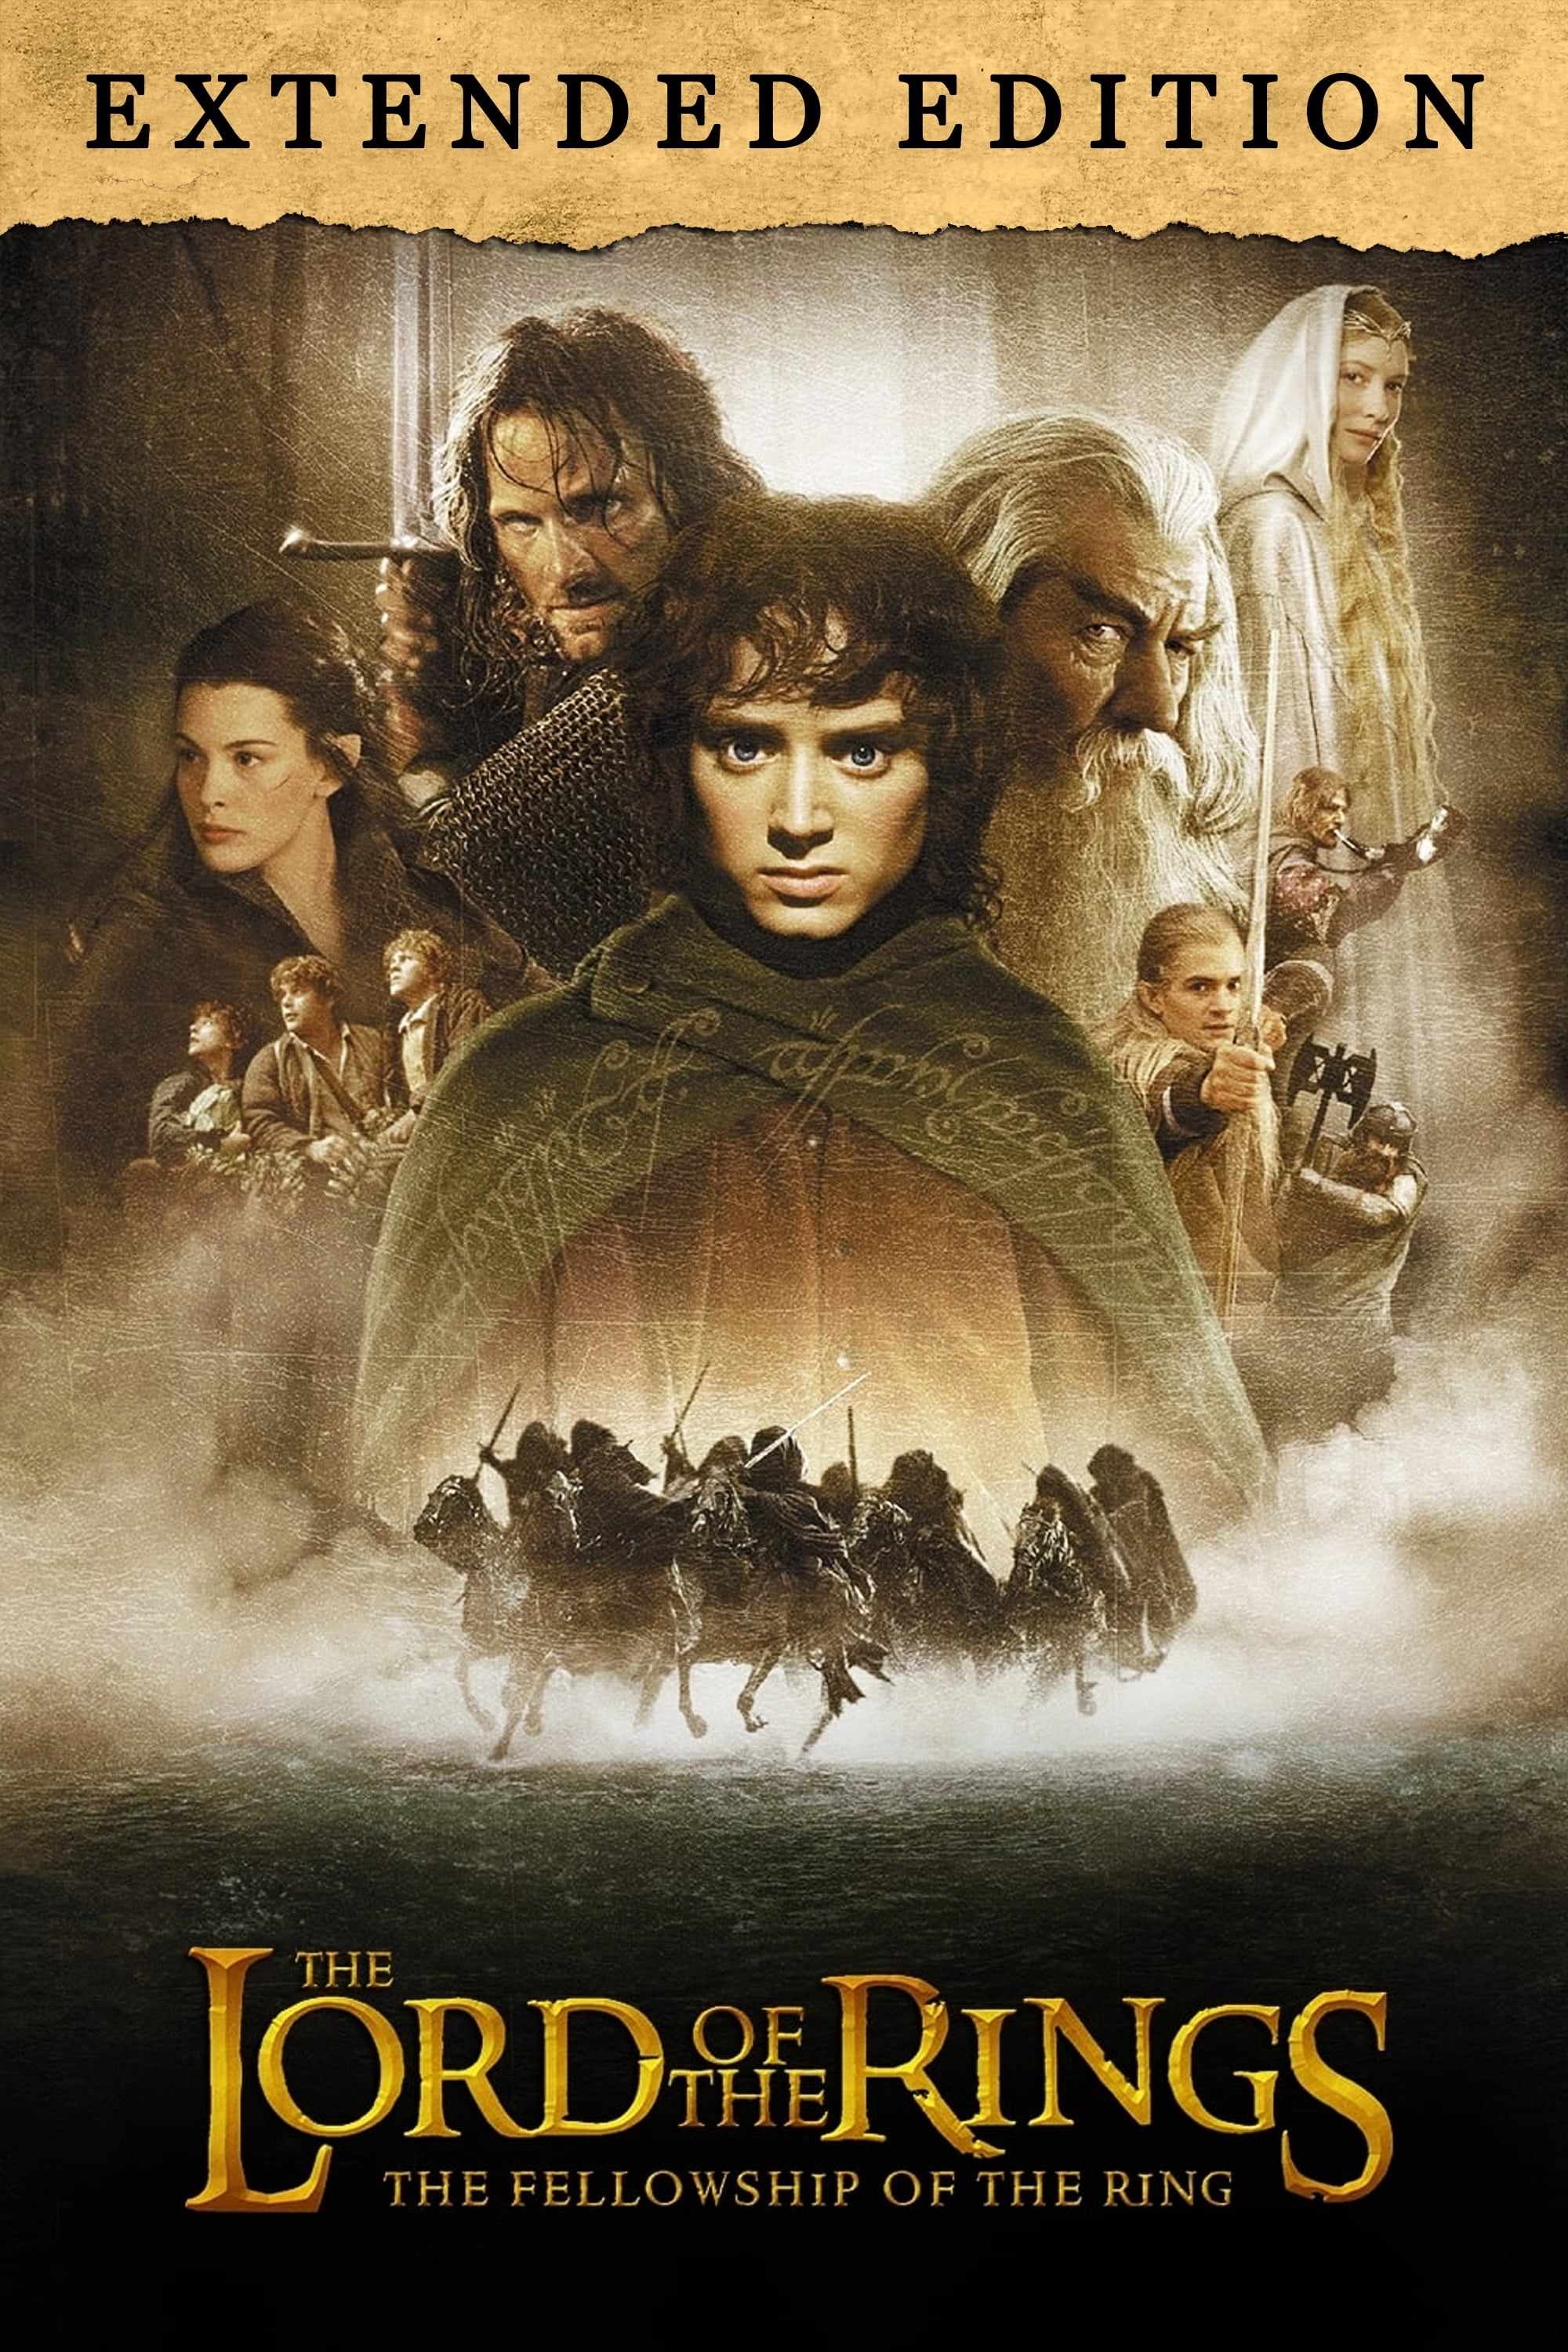 LOTR - The Fellowship of the Ring